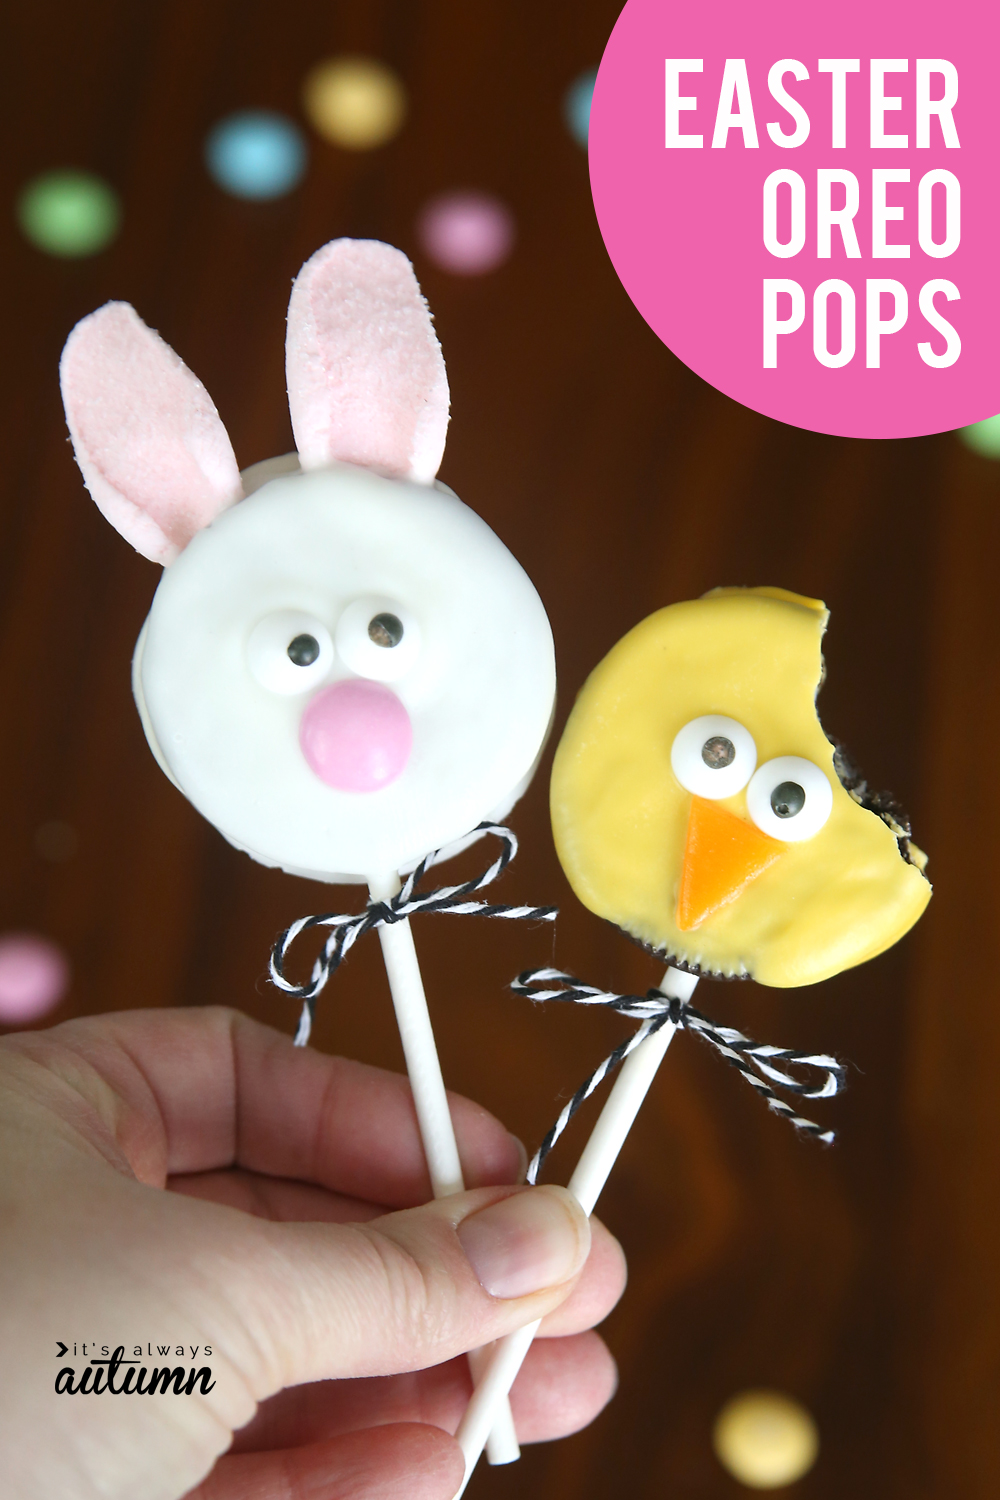 Easter Oreo pops! These chick and bunny Oreo pops are the perfect easy treat for Easter.